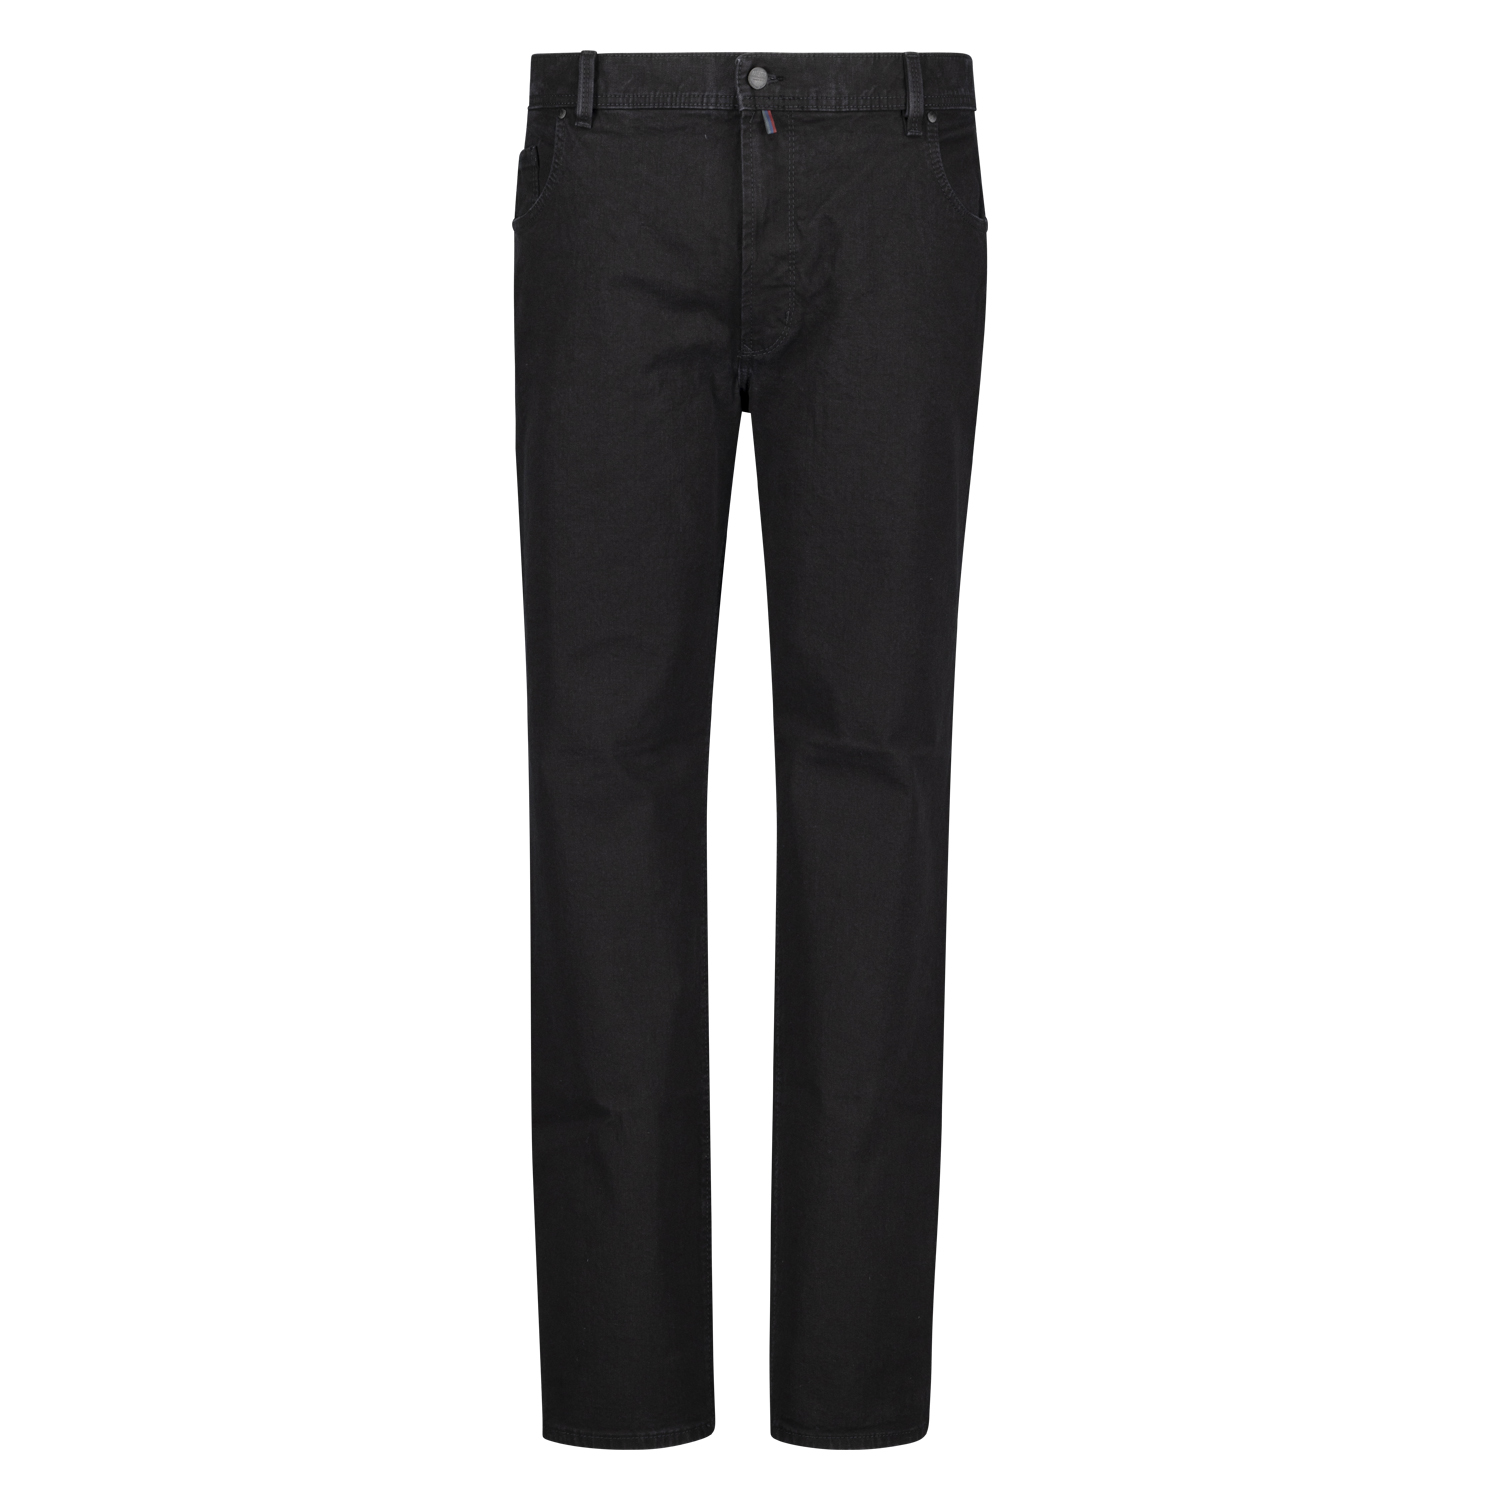 5-Pocket Jeans homme avec stretch "Peter" noir by Pioneer grandes tailles (Taille haute): 59 - 85